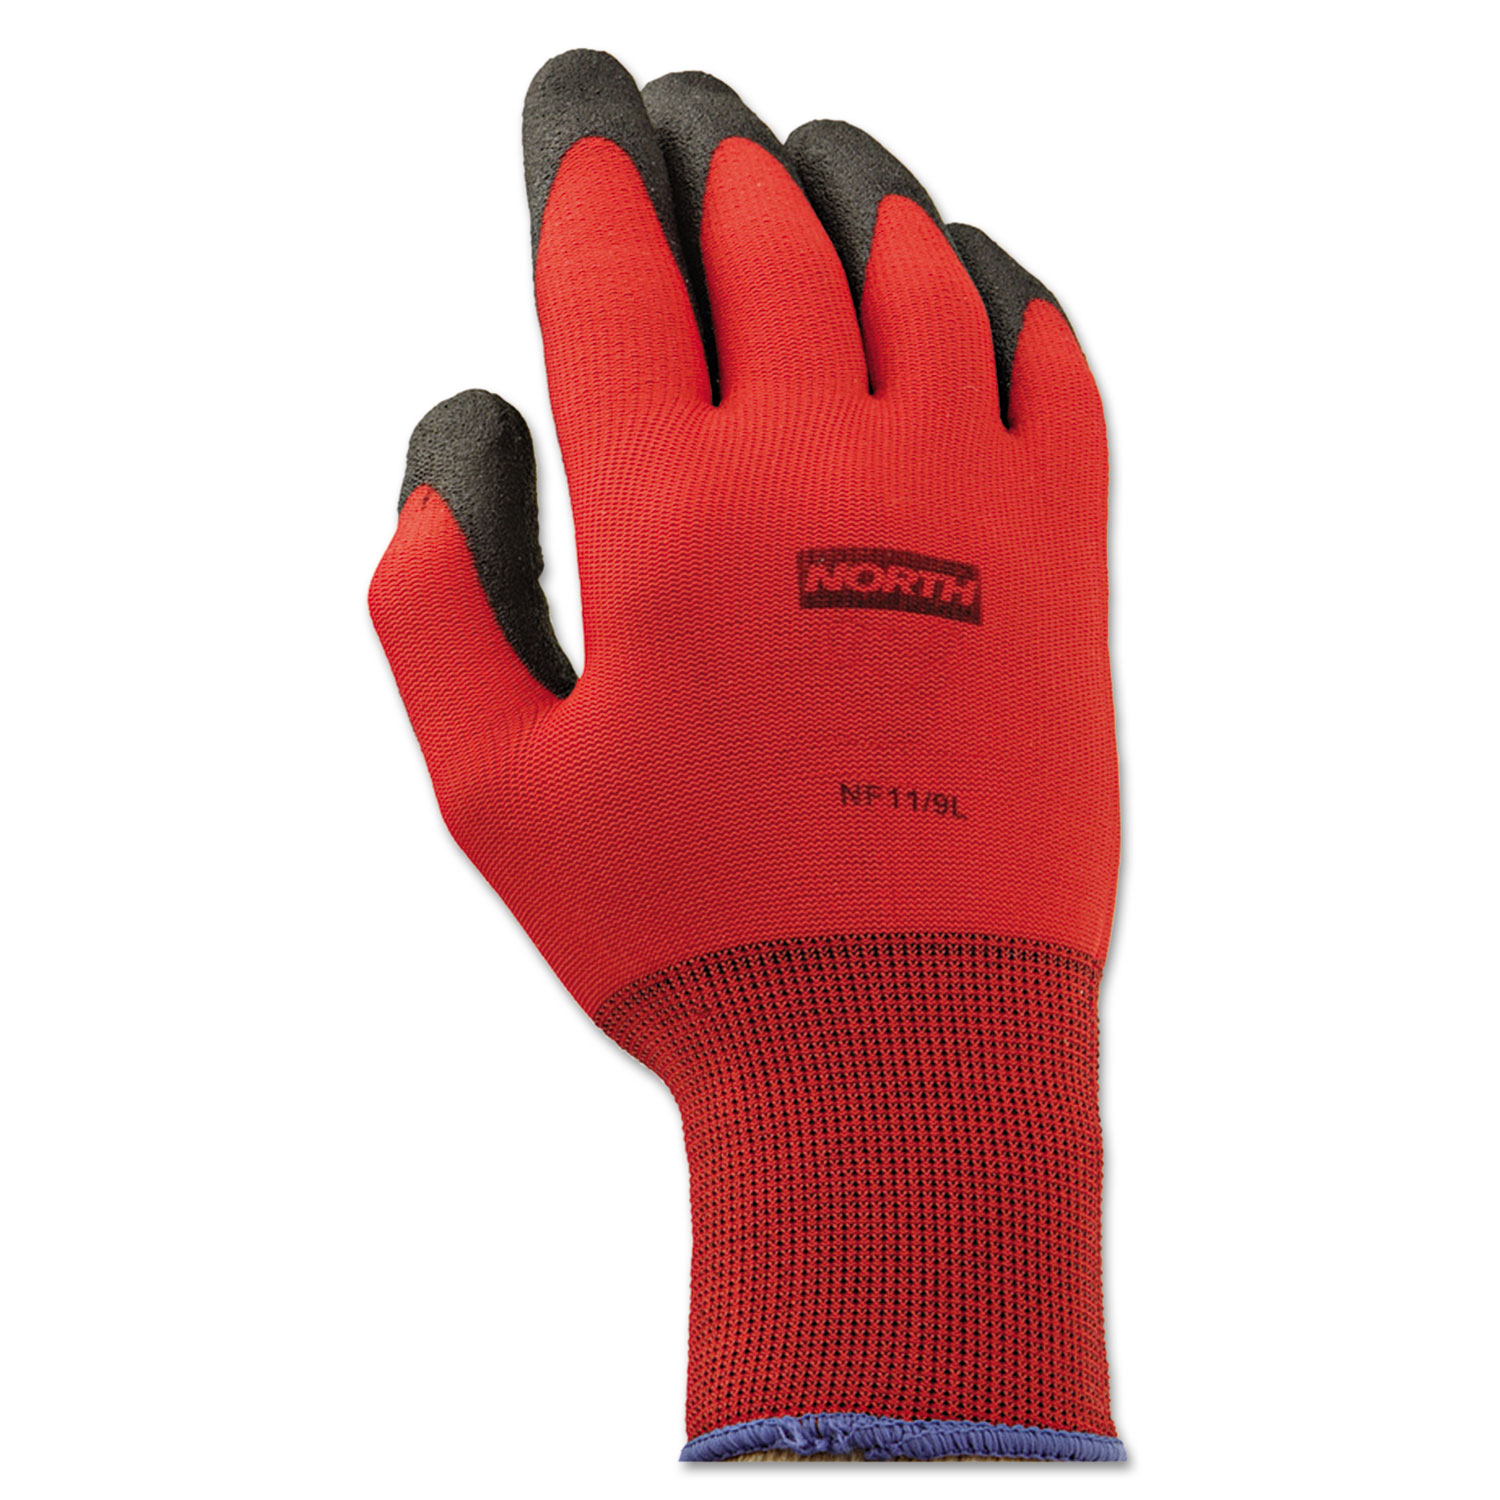  North Safety NF11/9L NorthFlex Red Foamed PVC Gloves, Red/Black, Size 9/L, 12 Pairs (NSPNF119L) 